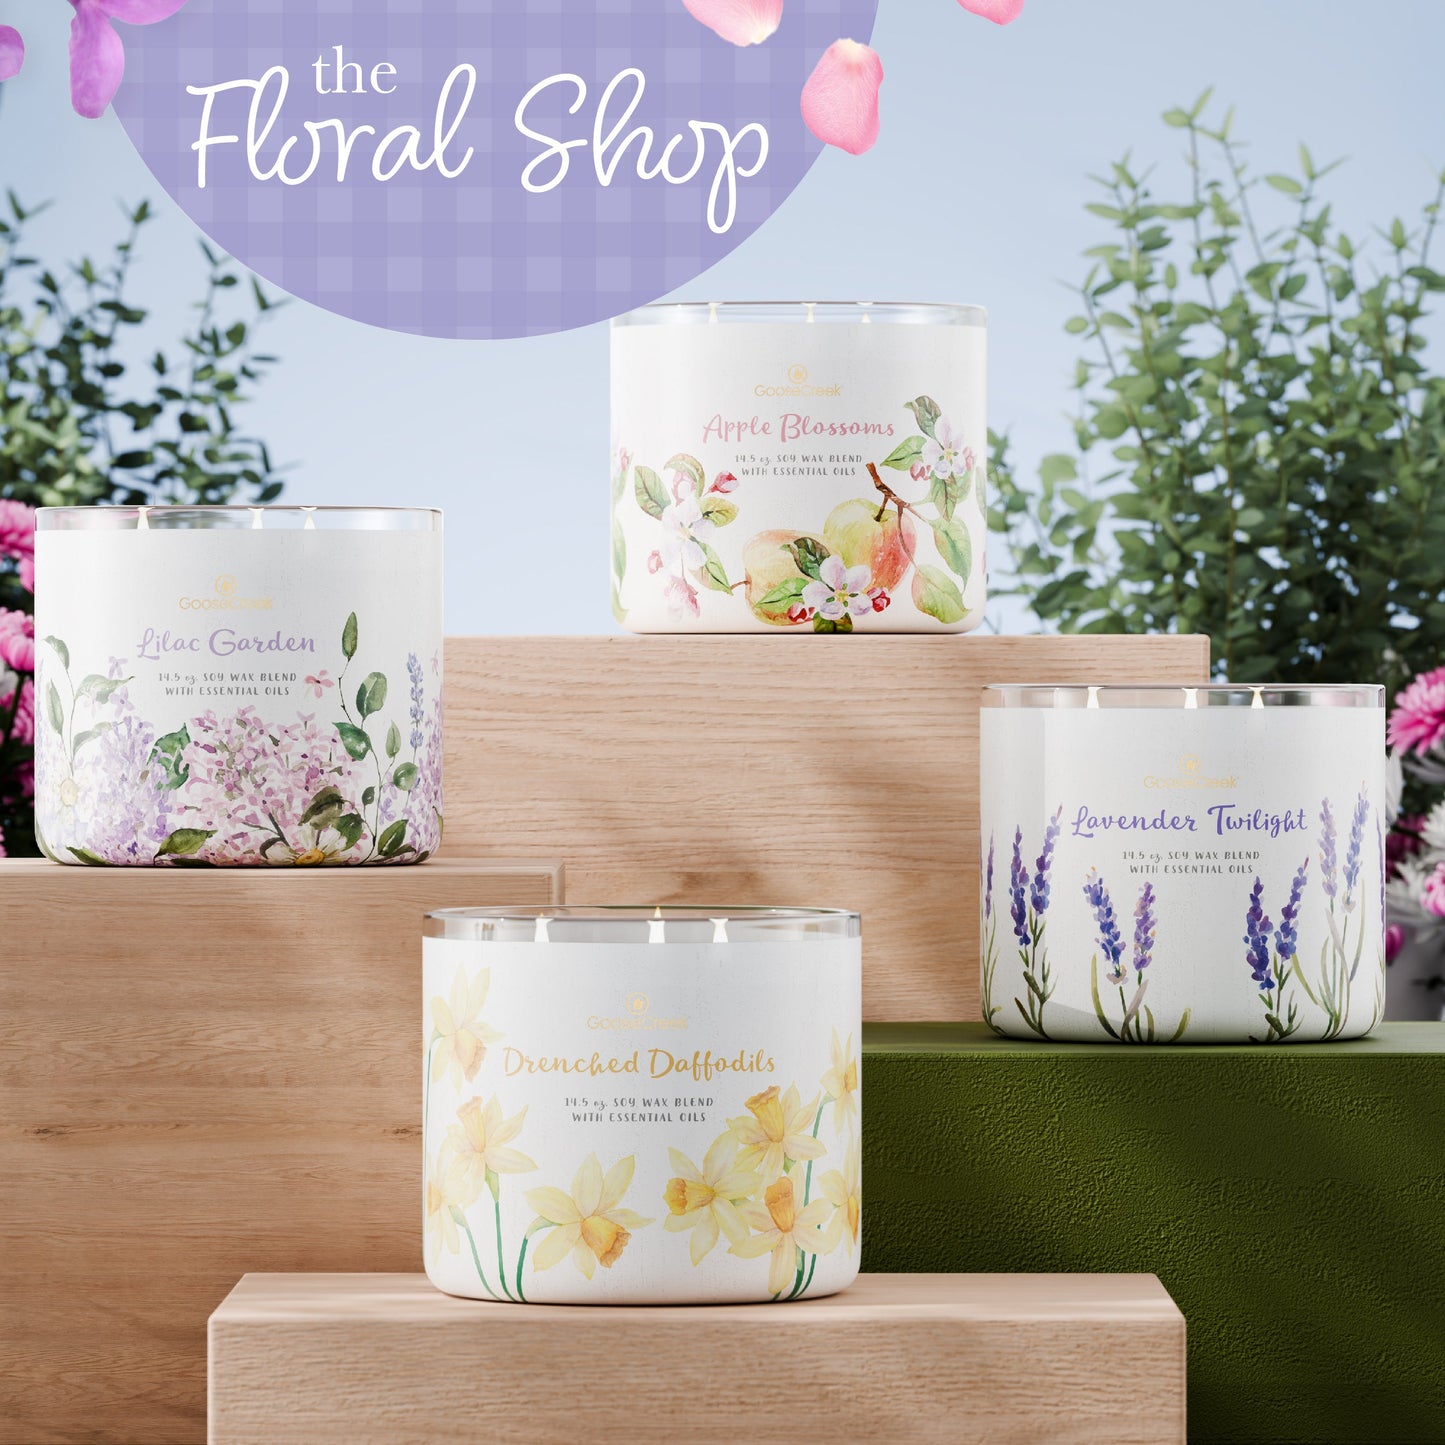 Butterfly Garden Large 3-Wick Candle